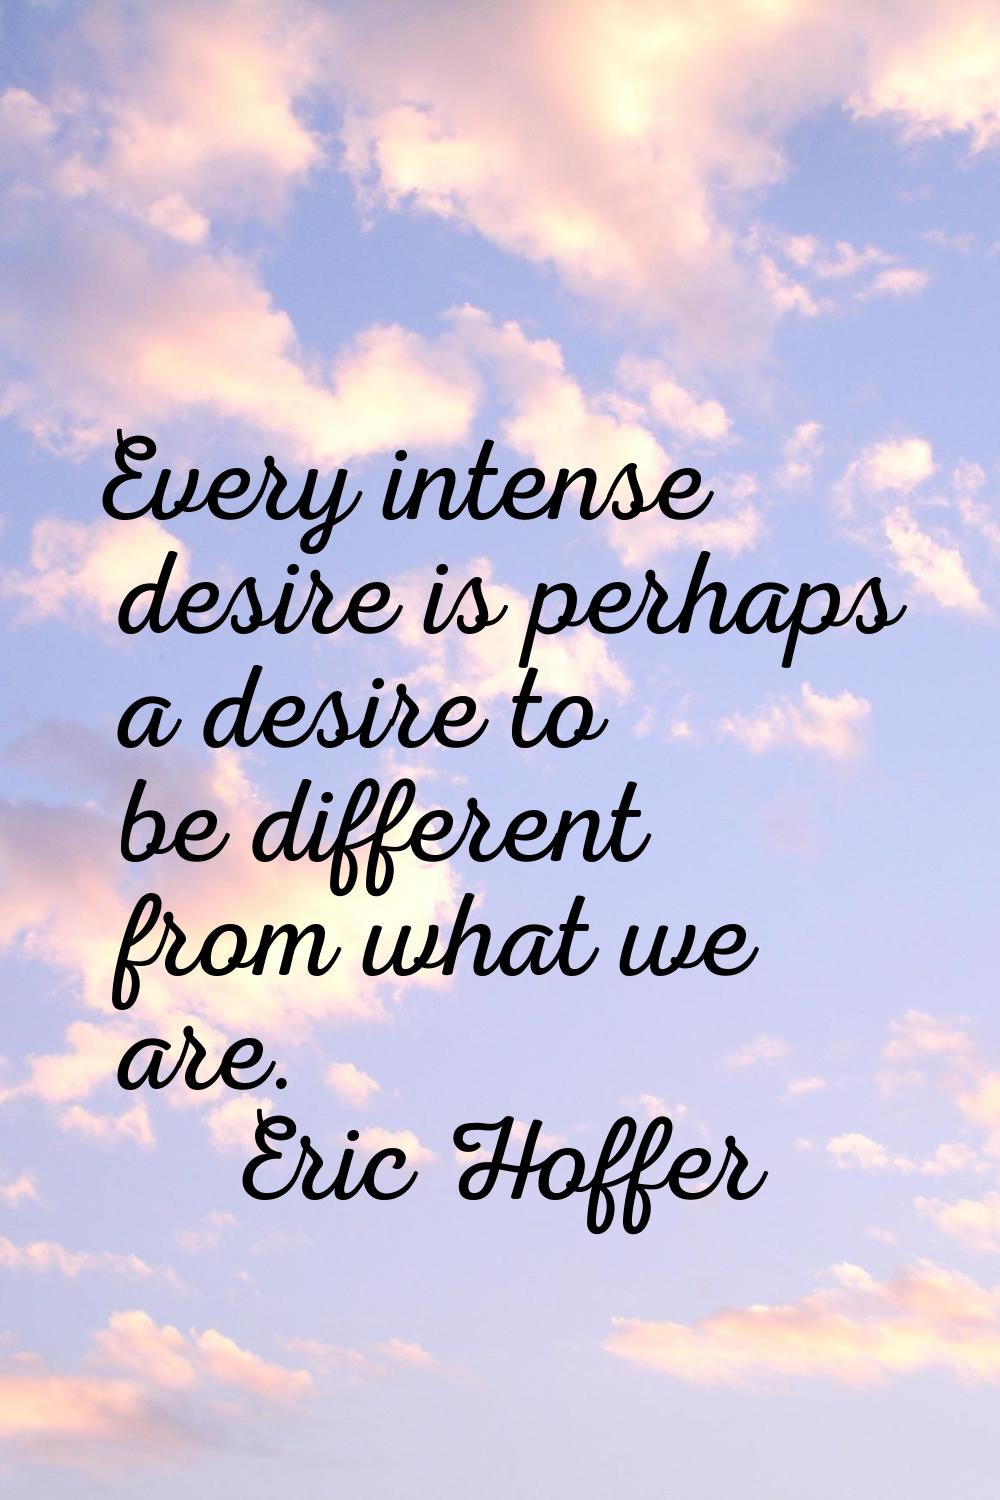 Every intense desire is perhaps a desire to be different from what we are.